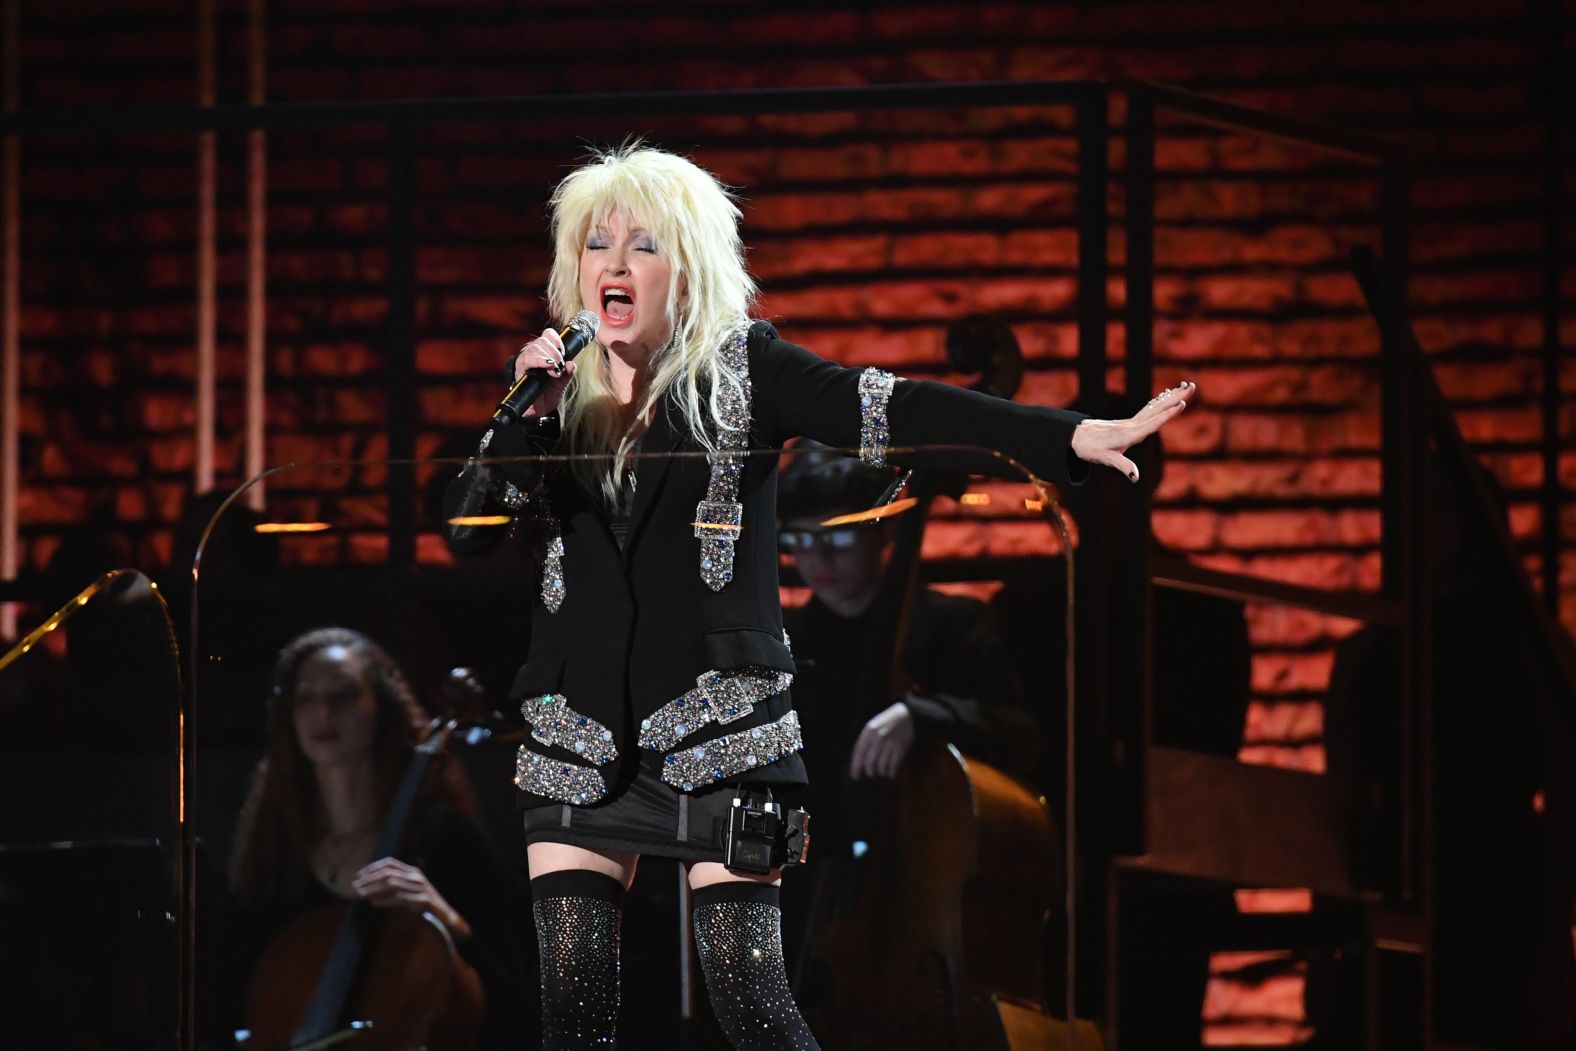 Cyndi Lauper sings "I Sing The Body Electric" from the 1980 film "Fame." The performance was part of a tribute to Ken Ehrlich as he ended his 40 years producing the awards show. 